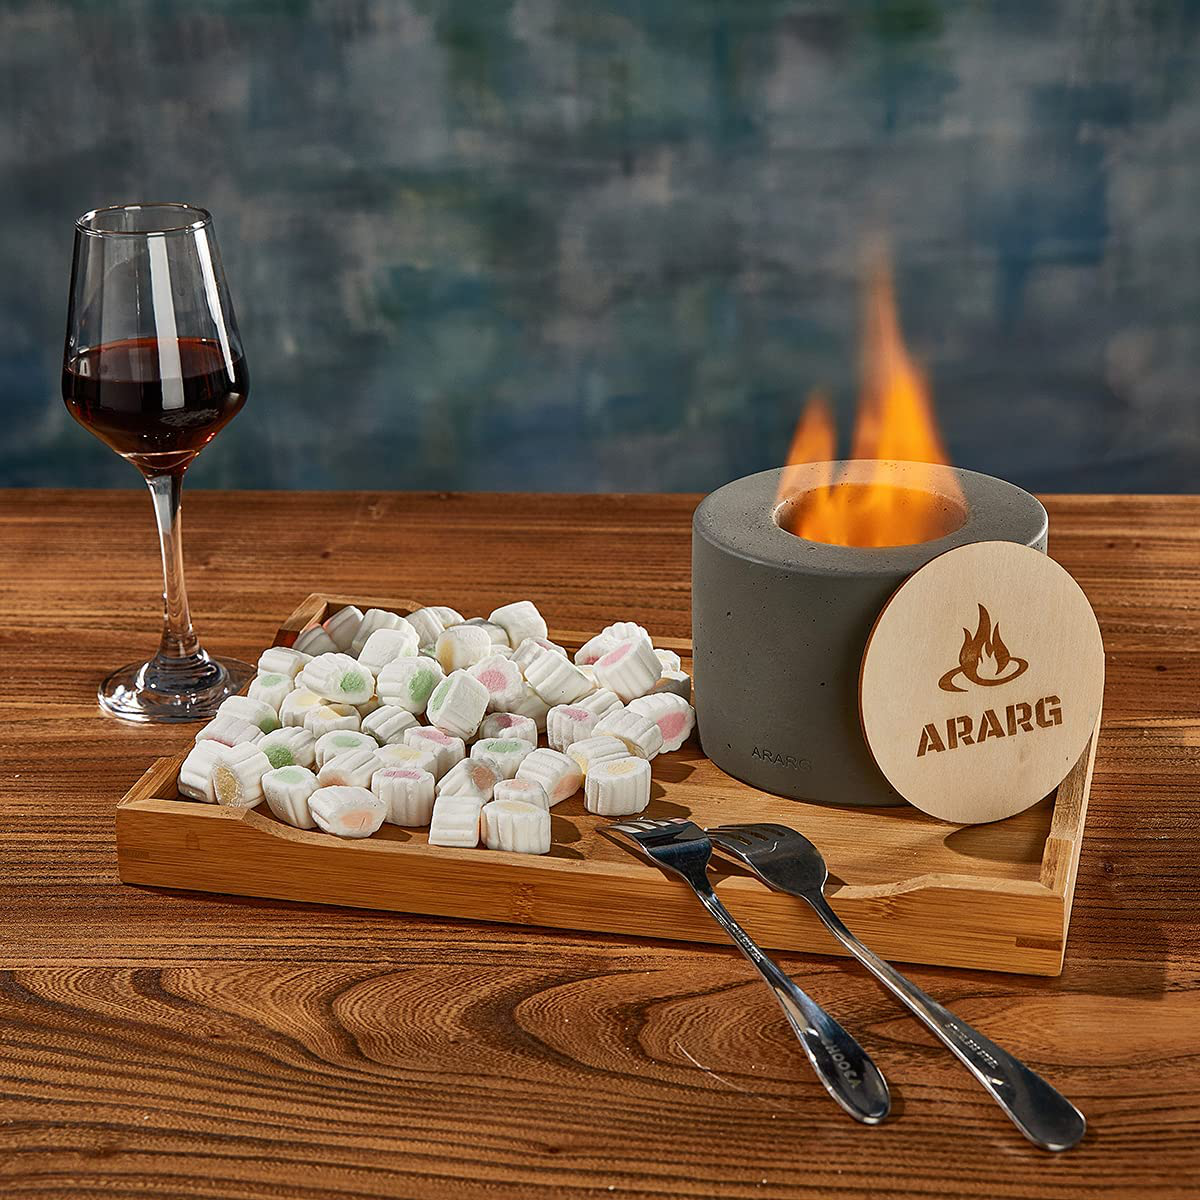 Ararg Tabletop Fire Pit, Tabletop Fireplace with Wooden Pad, Indoor Outdoor Mini Fire Bowl, Portable Concrete Fire Pit, Smores Maker, Isopropyl Alcohol and Ethanol, 5.1 x 5.1 x 3.6 Inches